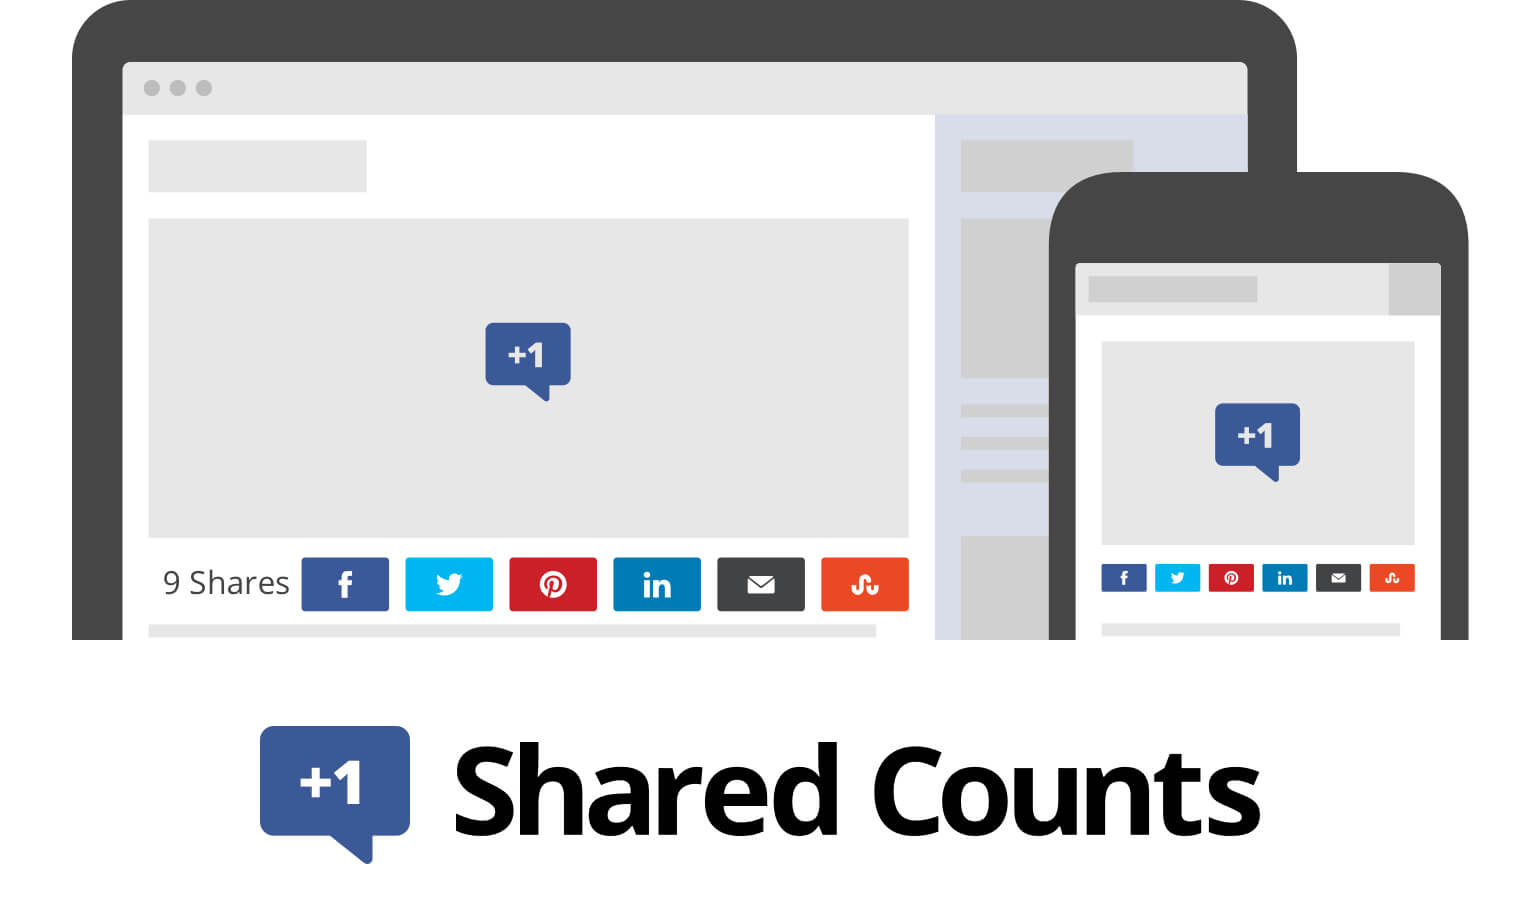 shared counts